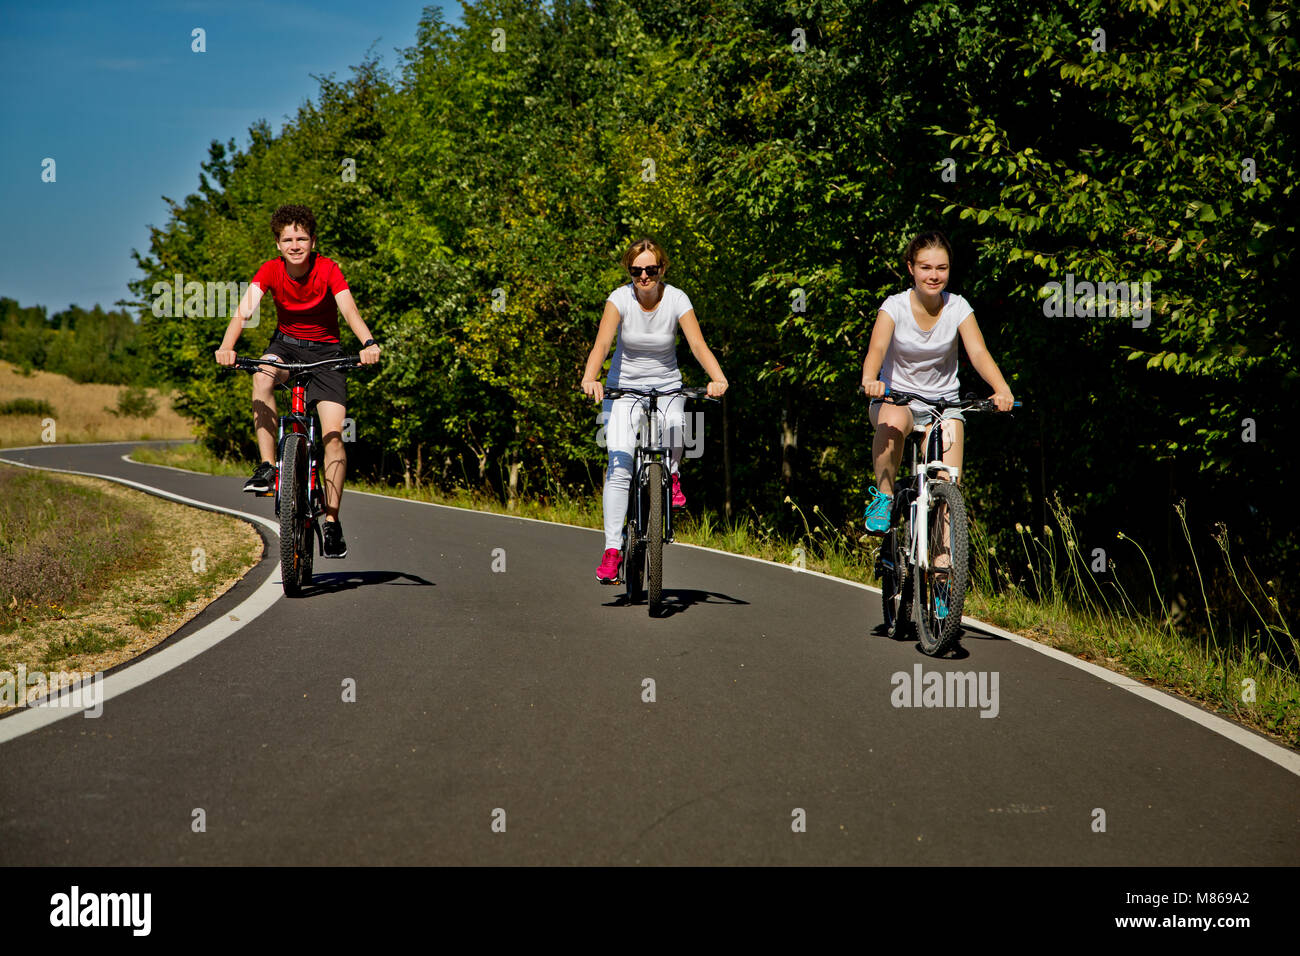 Healthy lifestyle - people riding bicycles Stock Photo